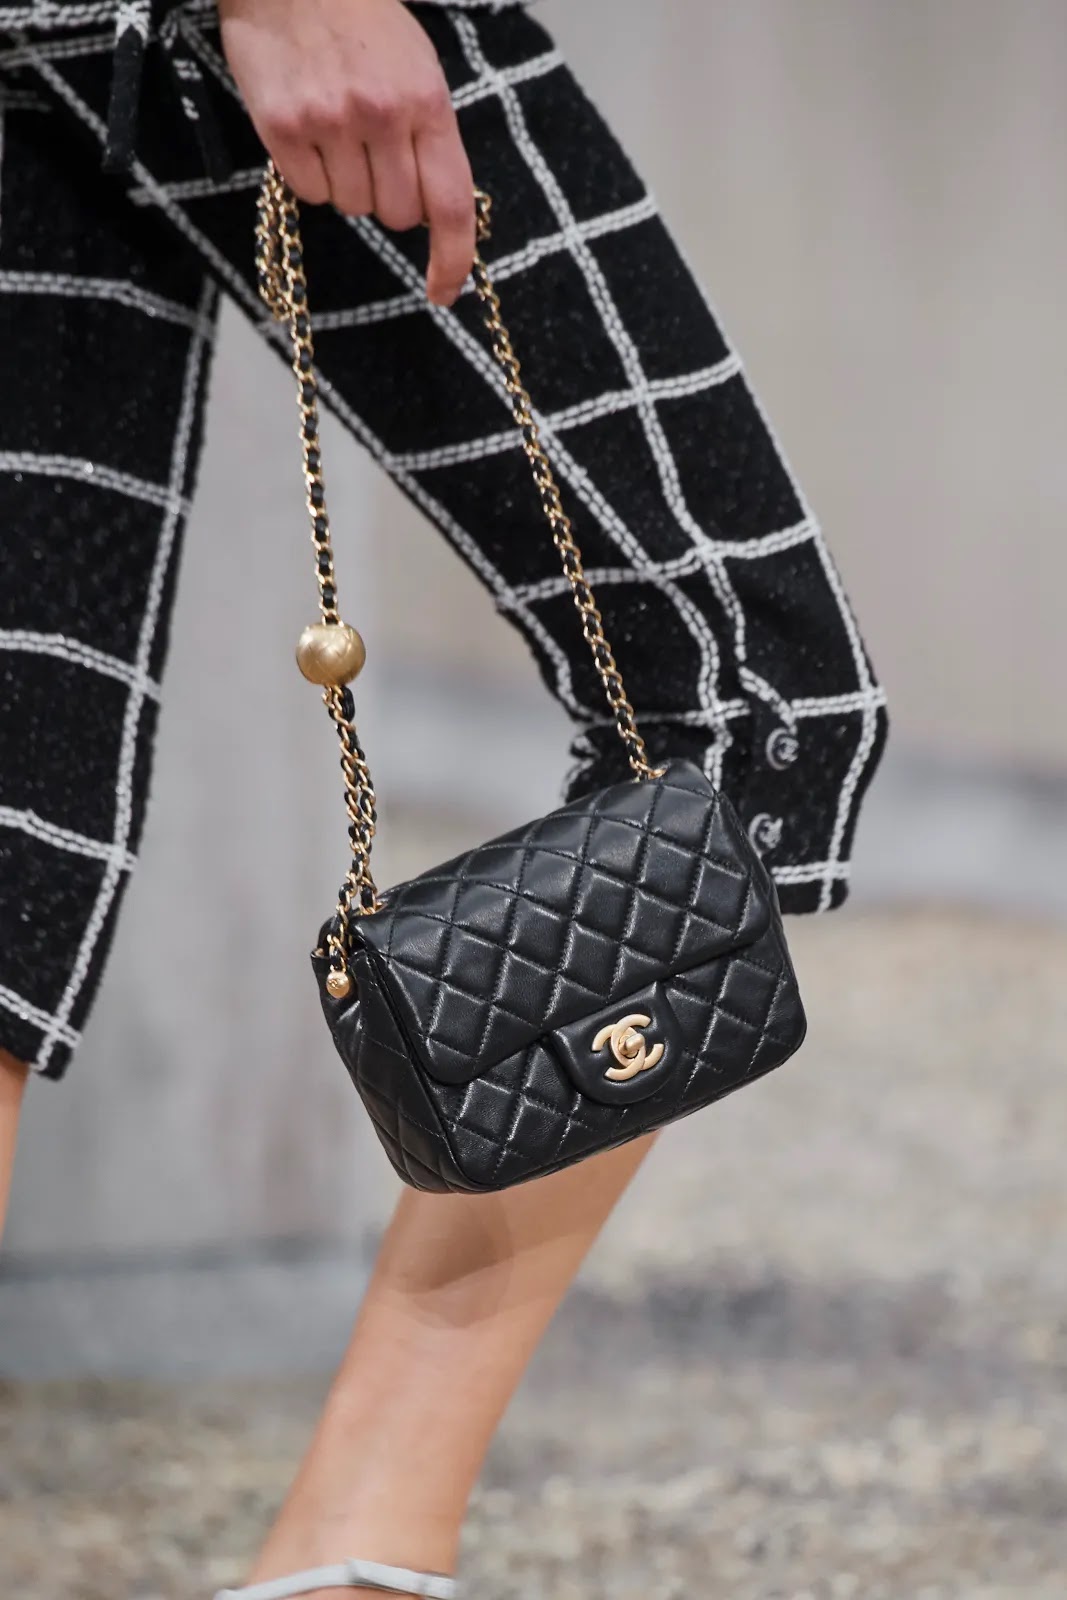 Chanel SPRING 2020 READY-TO-WEAR | Cool Chic Style Fashion